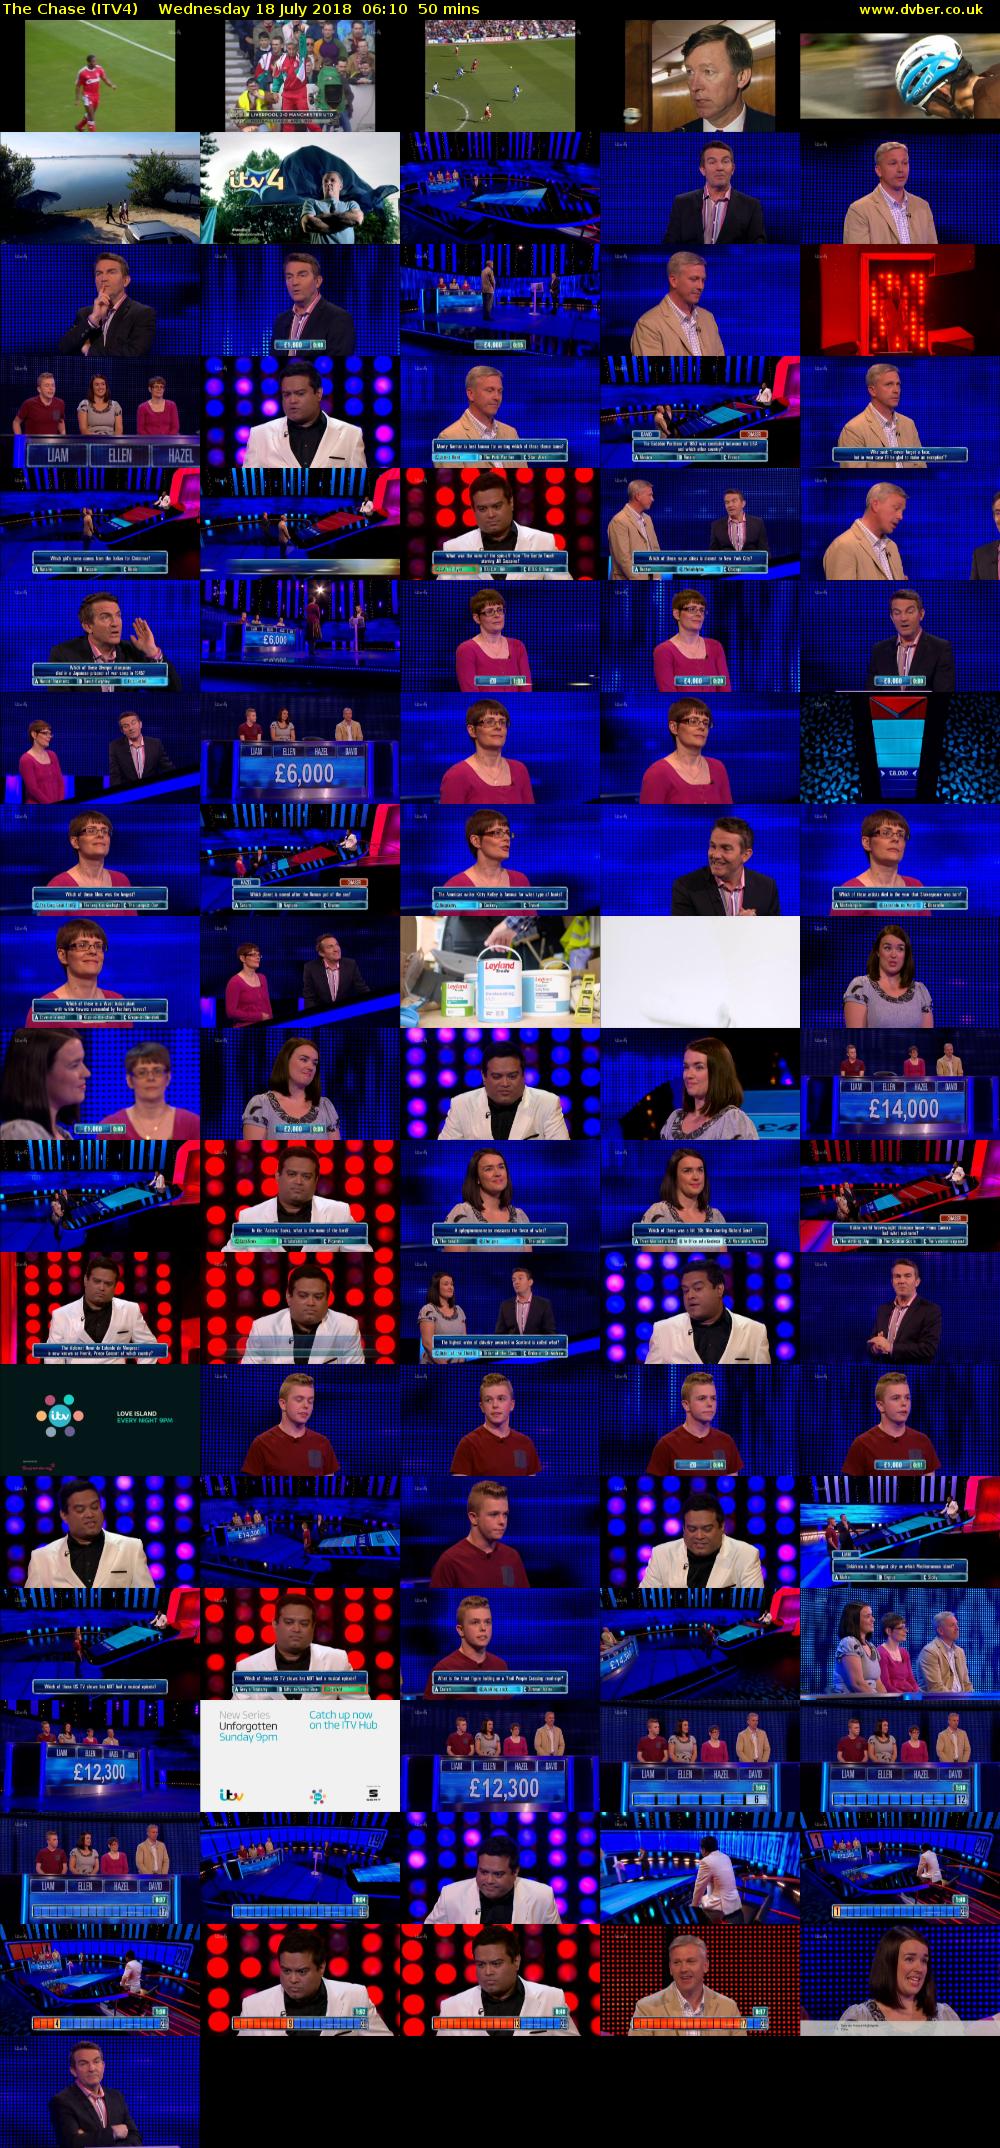 The Chase (ITV4) Wednesday 18 July 2018 06:10 - 07:00